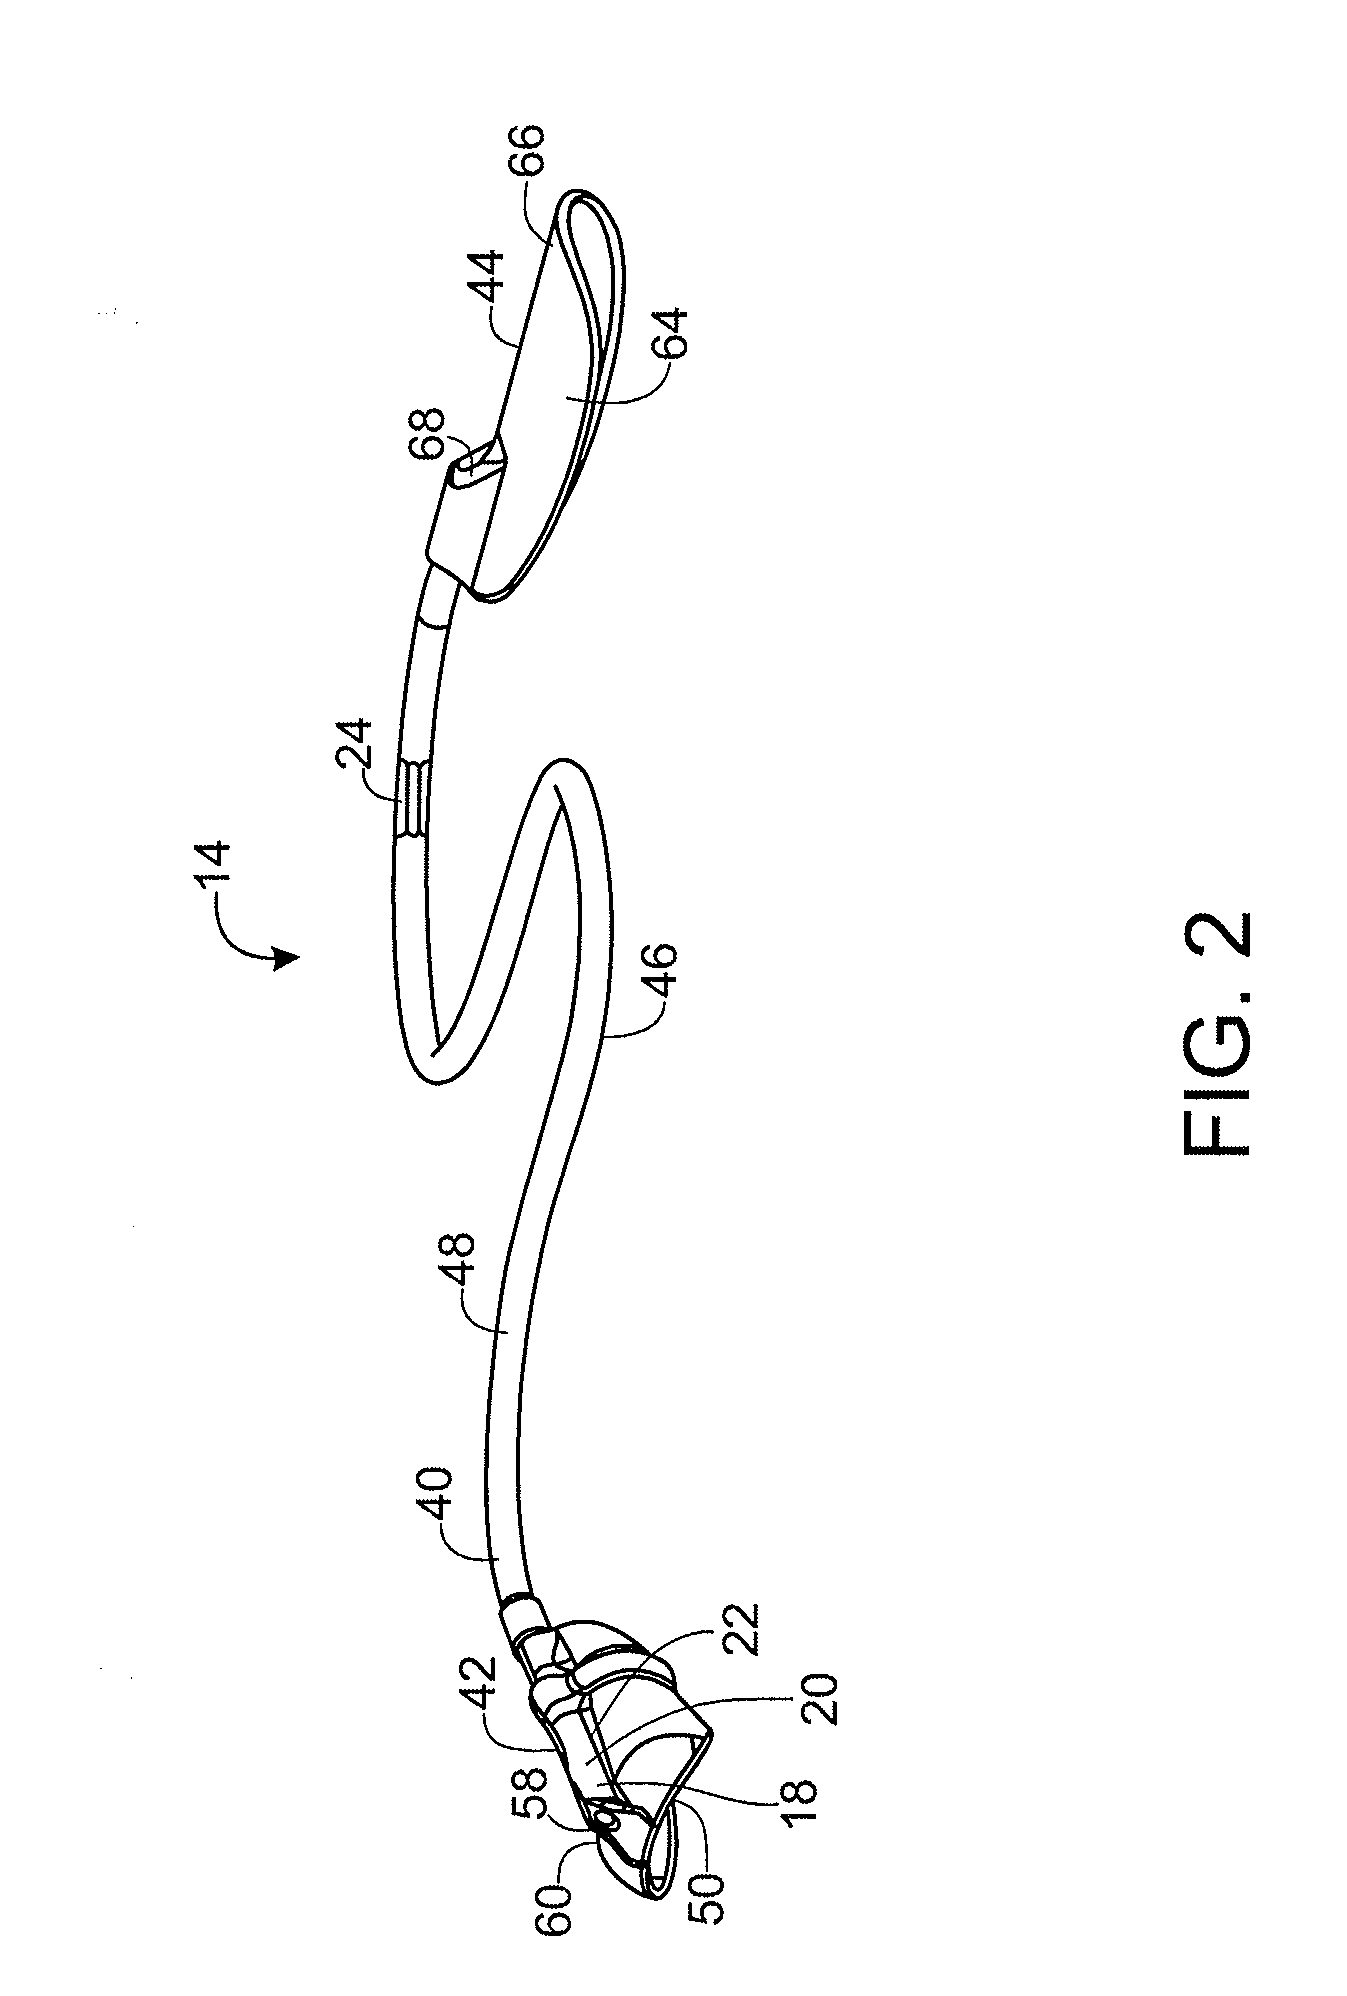 Apparatus, system and methods for proper transesophageal echocardiography probe positioning by using camera for ultrasound imaging